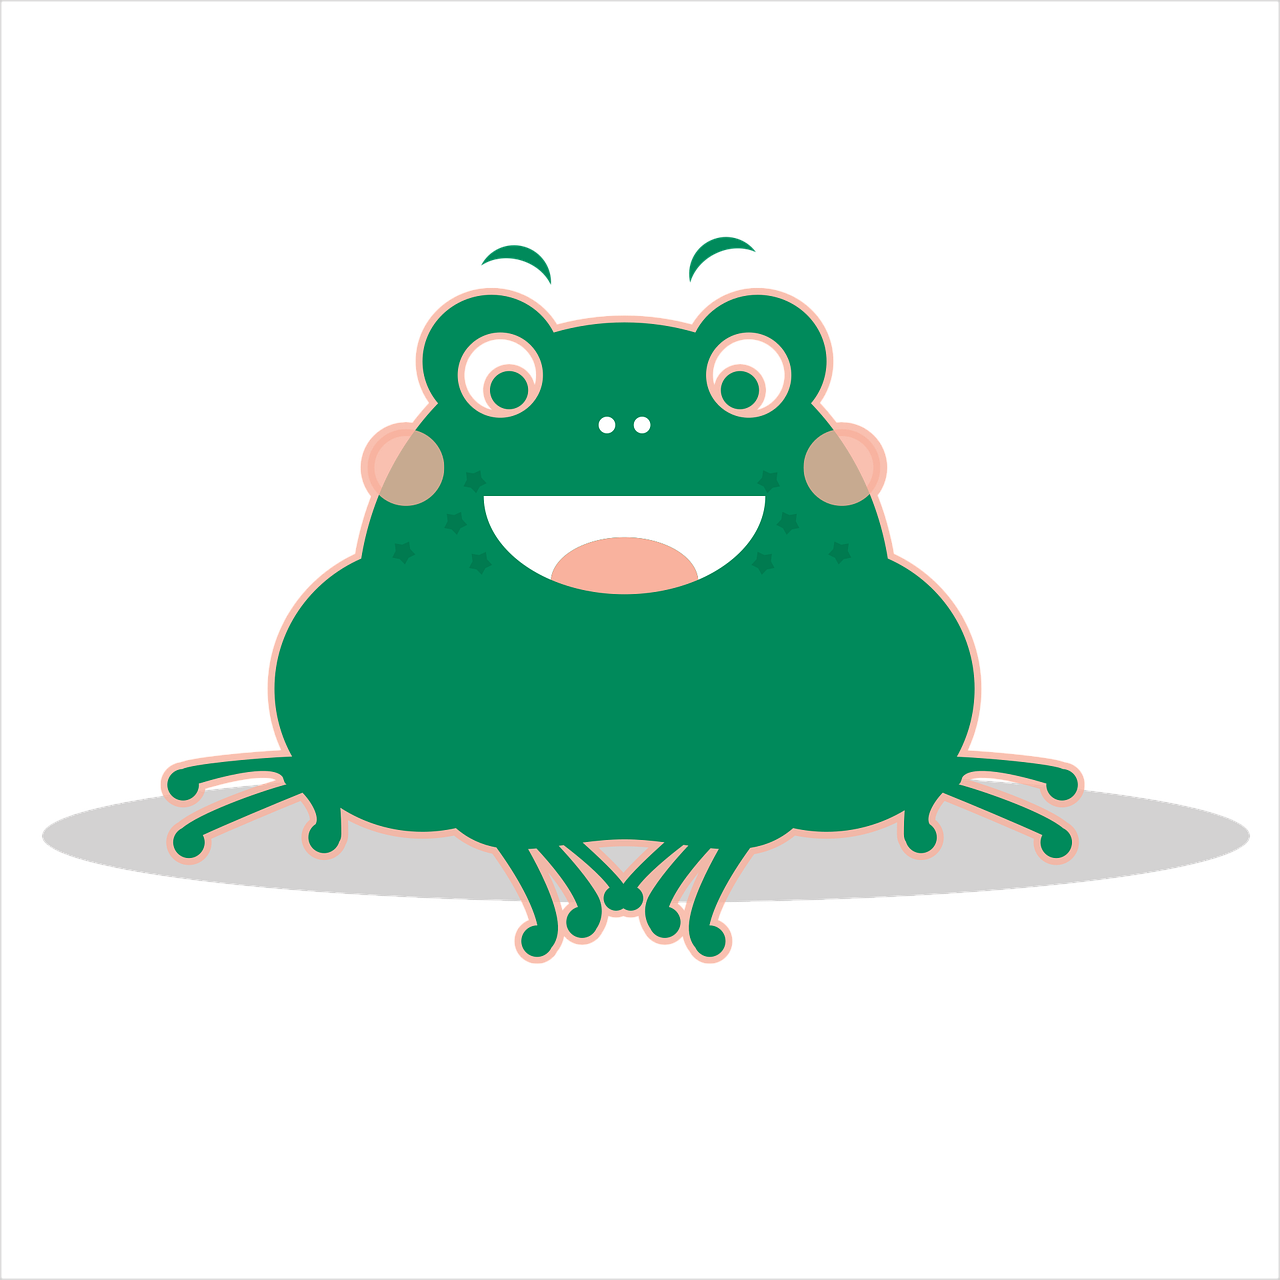 the little frog green smile free photo